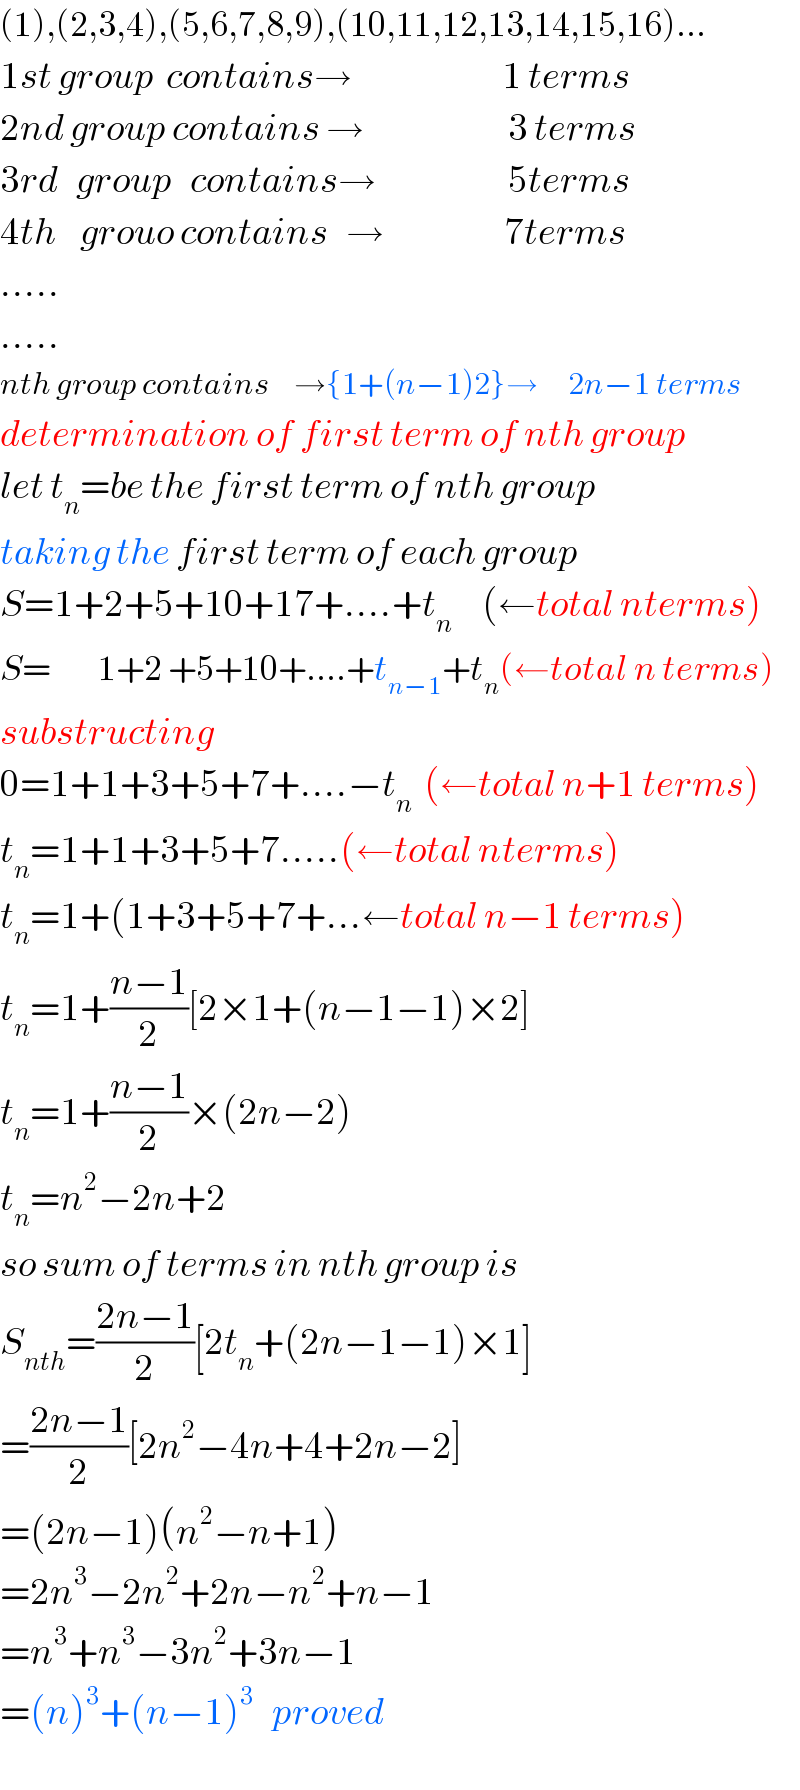 (1),(2,3,4),(5,6,7,8,9),(10,11,12,13,14,15,16)...  1st group  contains→                         1 terms  2nd group contains →                        3 terms  3rd   group   contains→                      5terms  4th    grouo contains   →                    7terms  .....  .....  nth group contains    →{1+(n−1)2}→     2n−1 terms  determination of first term of nth group  let t_n =be the first term of nth group  taking the first term of each group  S=1+2+5+10+17+....+t_n      (←total nterms)  S=        1+2 +5+10+....+t_(n−1) +t_n (←total n terms)  substructing   0=1+1+3+5+7+....−t_n   (←total n+1 terms)  t_n =1+1+3+5+7.....(←total nterms)  t_n =1+(1+3+5+7+...←total n−1 terms)  t_n =1+((n−1)/2)[2×1+(n−1−1)×2]  t_n =1+((n−1)/2)×(2n−2)  t_n =n^2 −2n+2  so sum of terms in nth group is  S_(nth) =((2n−1)/2)[2t_n +(2n−1−1)×1]  =((2n−1)/2)[2n^2 −4n+4+2n−2]  =(2n−1)(n^2 −n+1)  =2n^3 −2n^2 +2n−n^2 +n−1  =n^3 +n^3 −3n^2 +3n−1  =(n)^3 +(n−1)^3    proved  